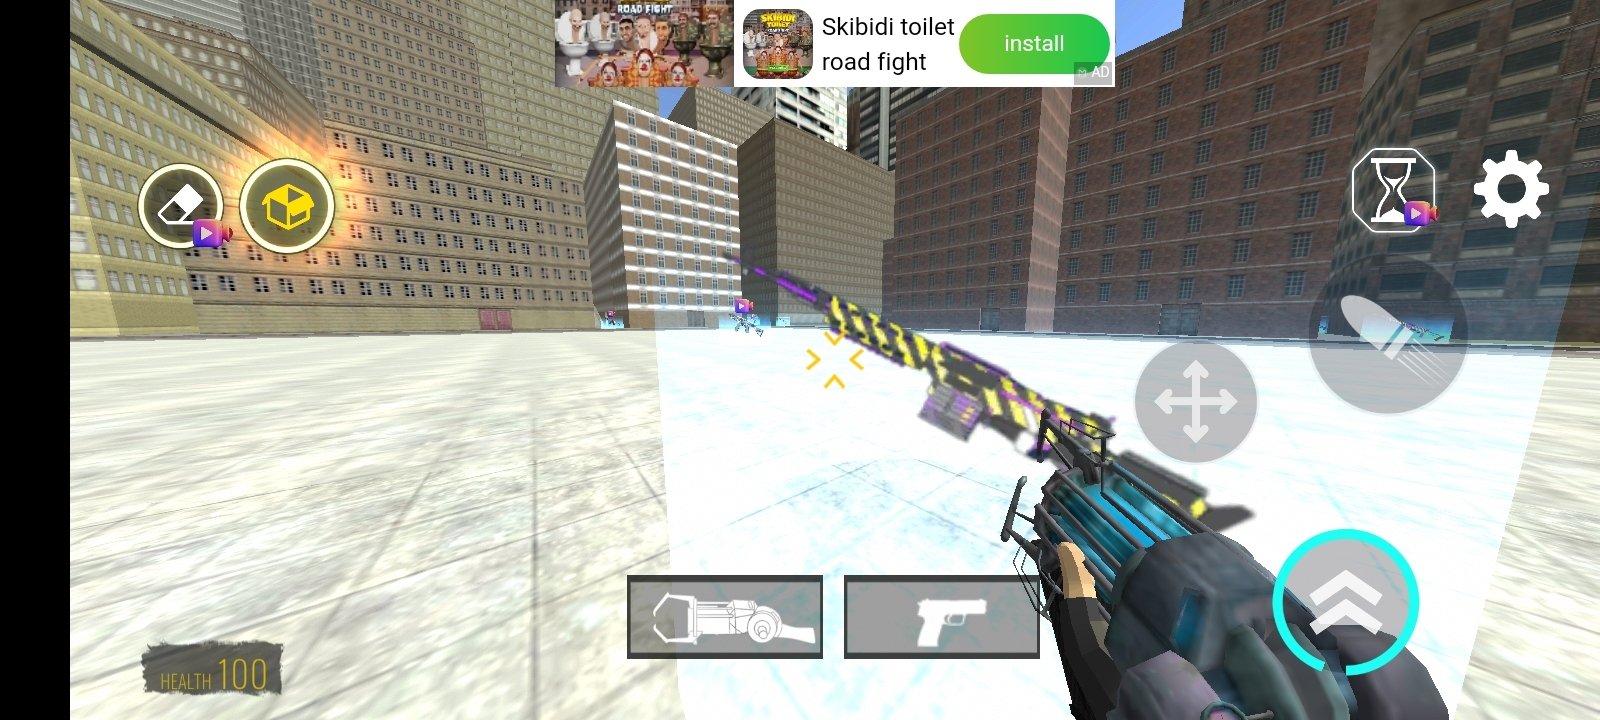 Nextbots In Backrooms: Shooter for Android - Free App Download